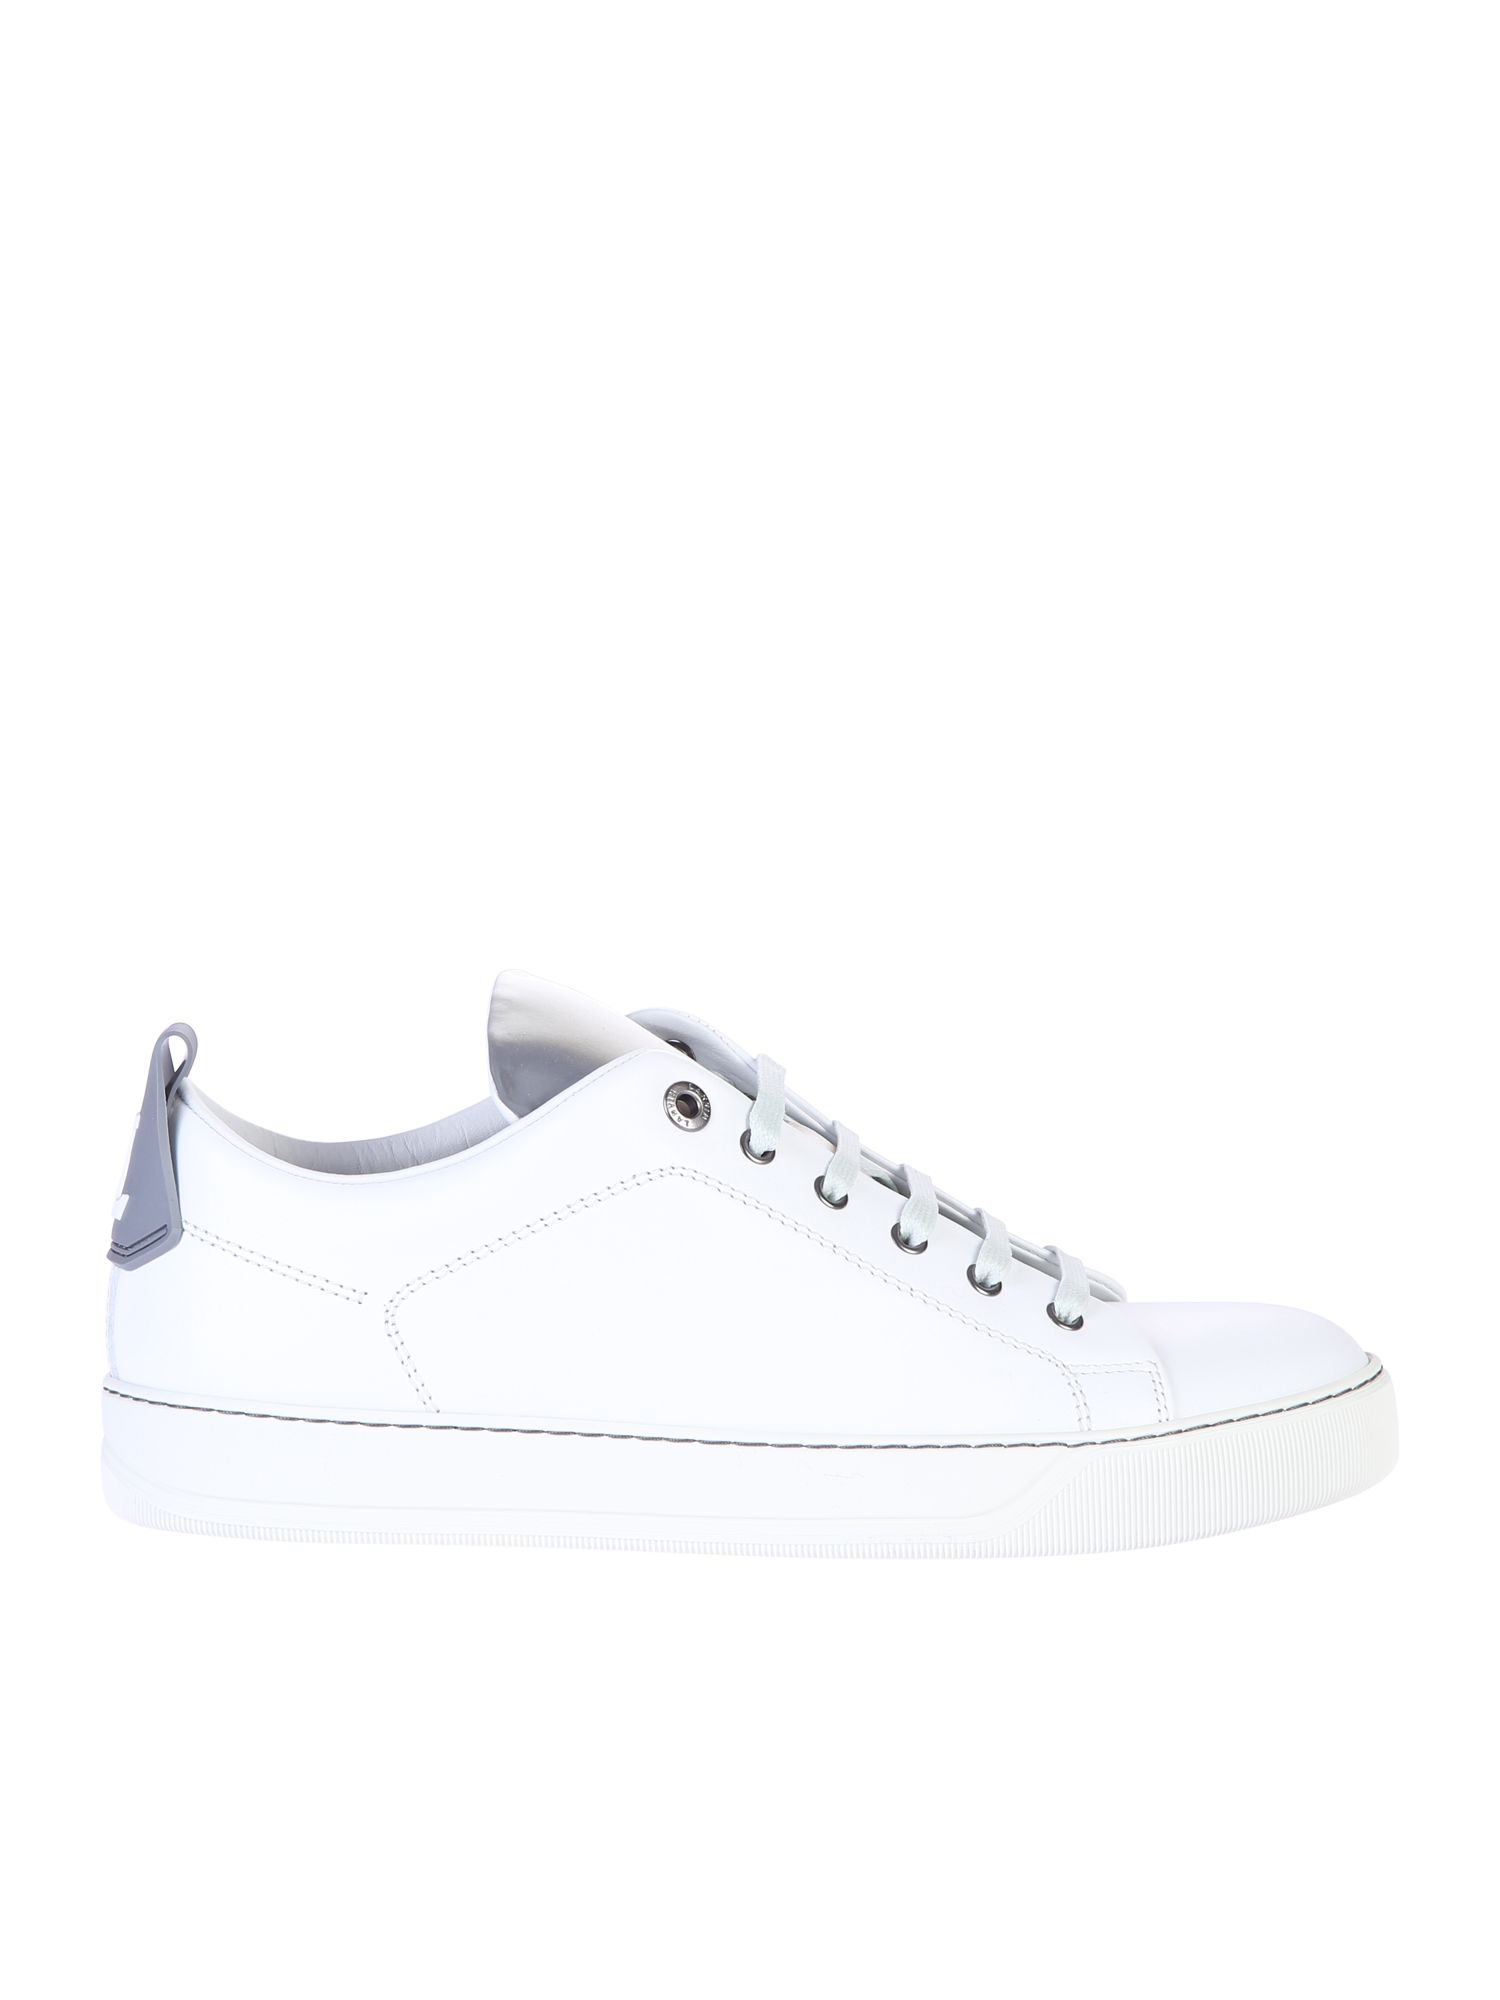 italist | Best price in the market for Lanvin Lanvin White Sneakers ...